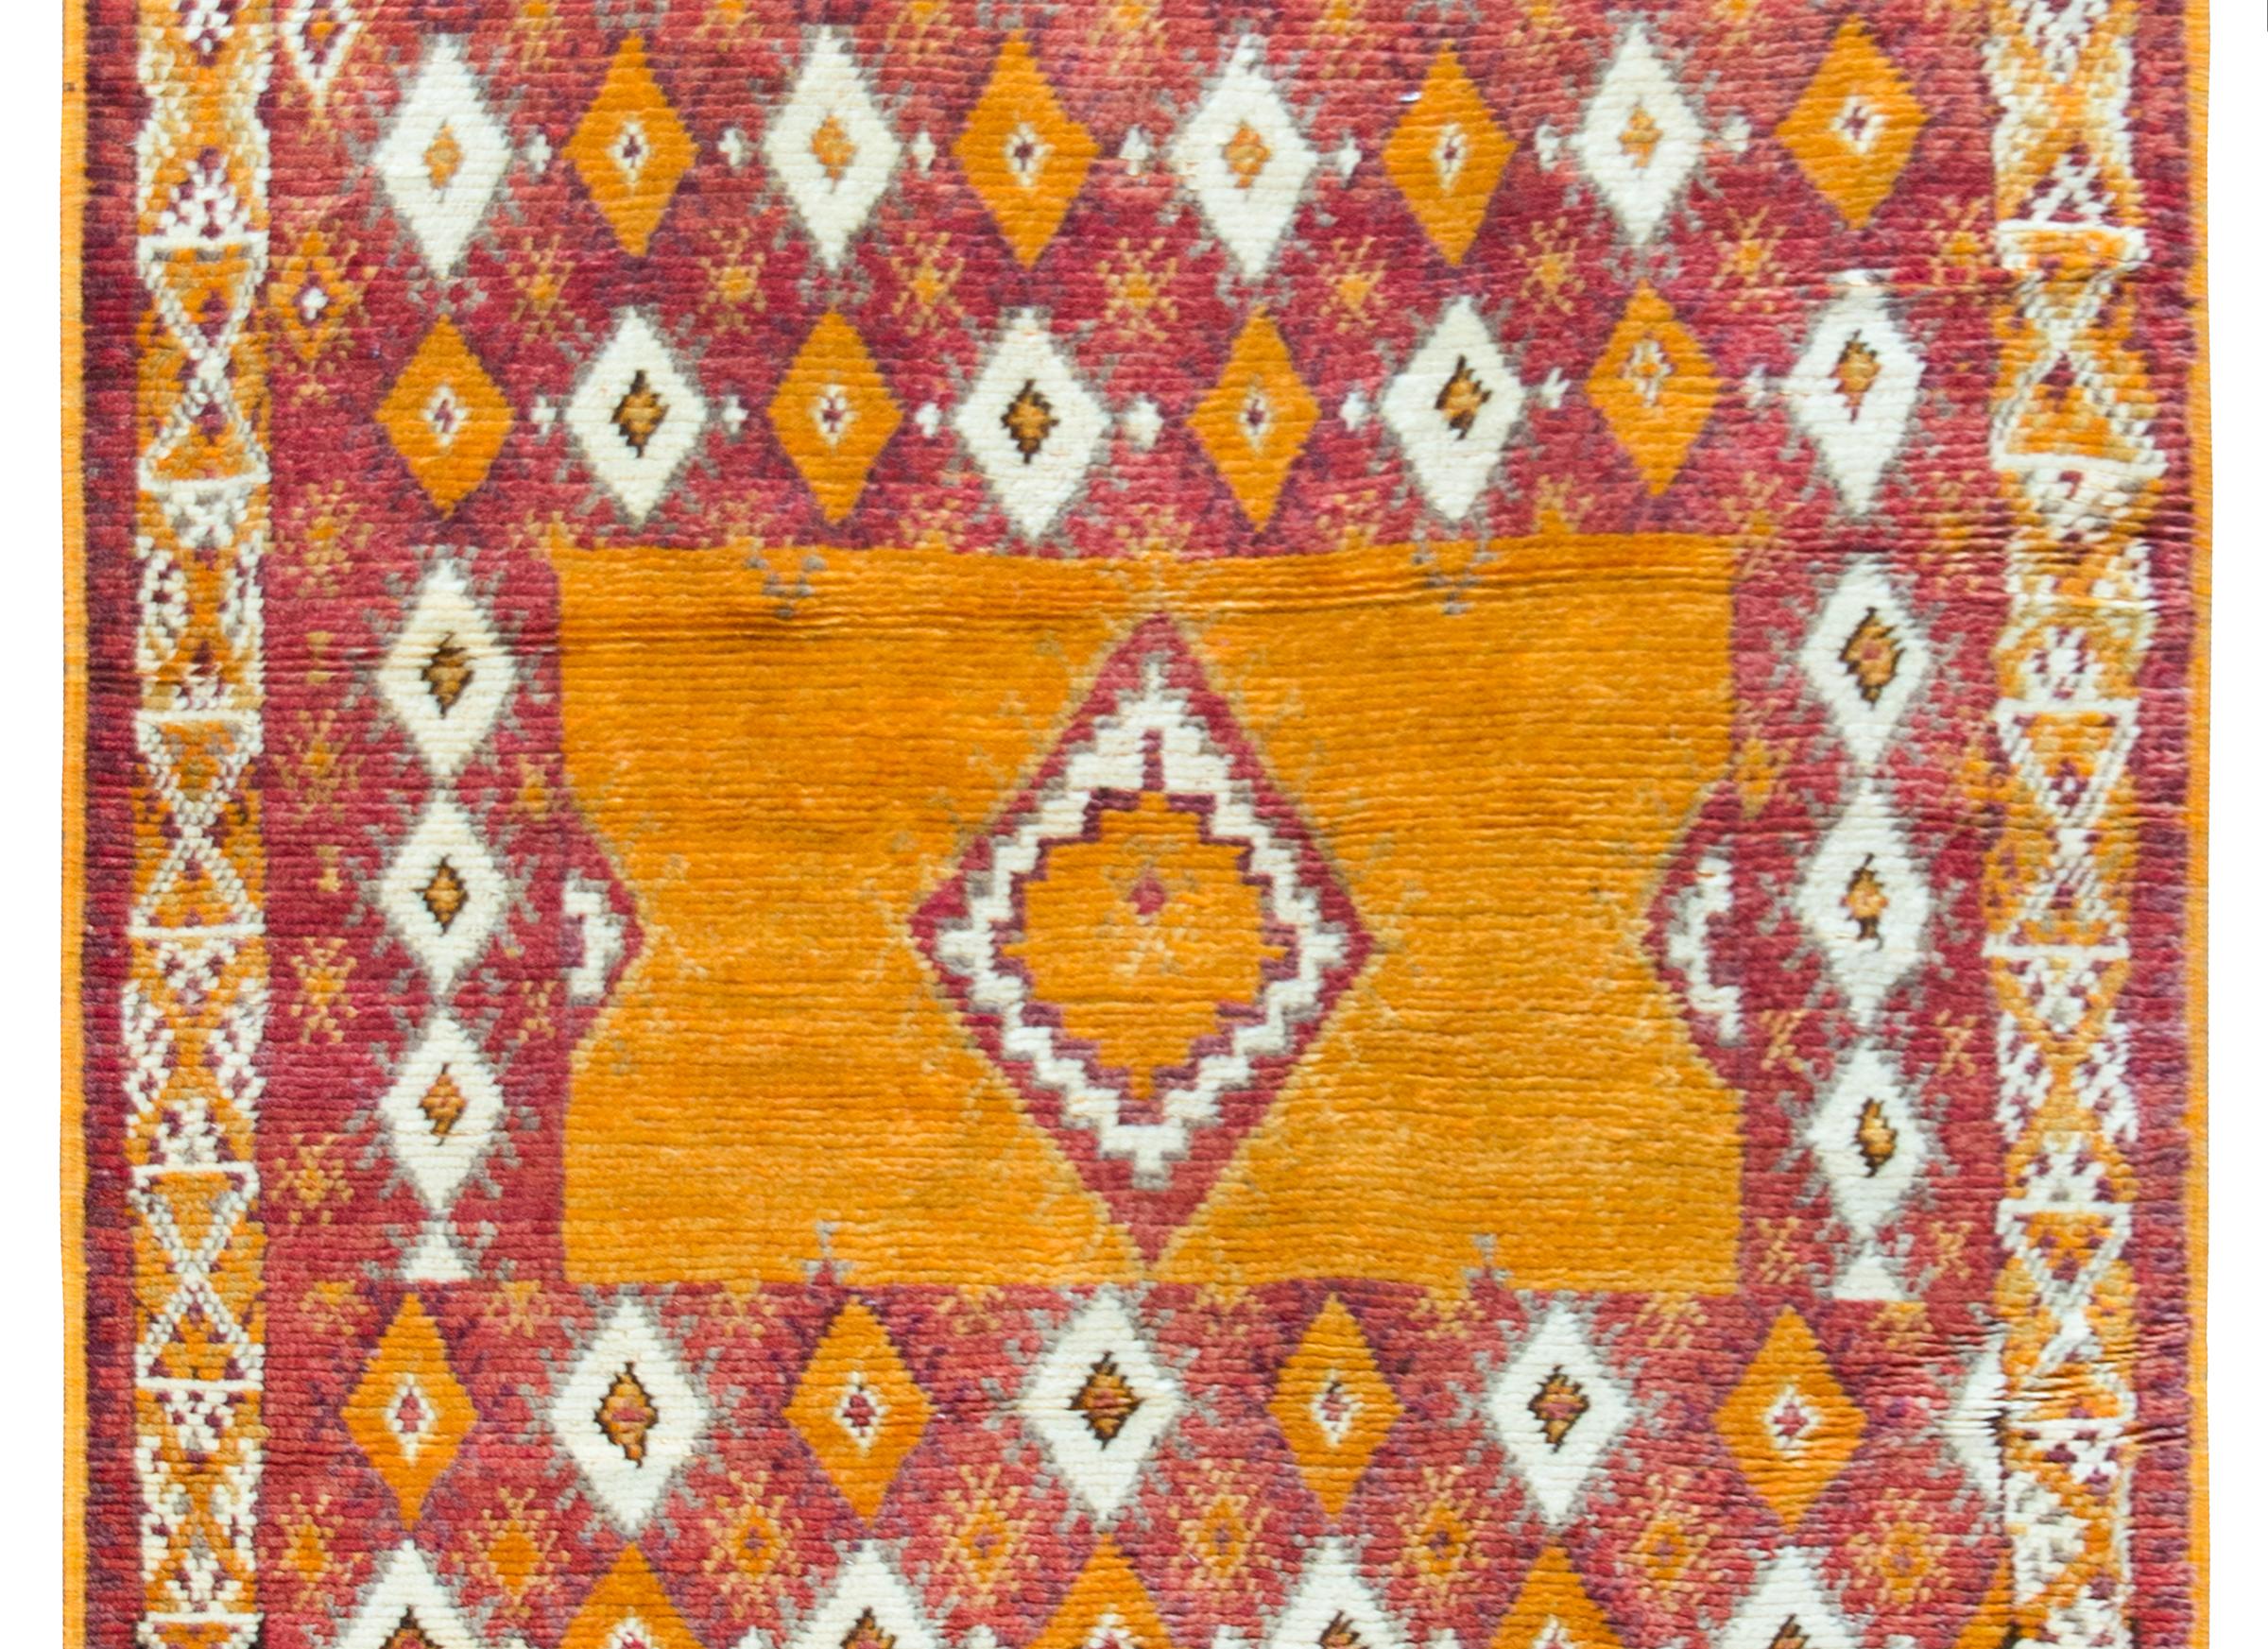 A bold vintage mid-20th century Moroccan rug with a large central diamond medallion set against an orange rectangular ground, and all set against a repeated cranberry, violet, orange, mustard and cream colored diamond patterned background, and all